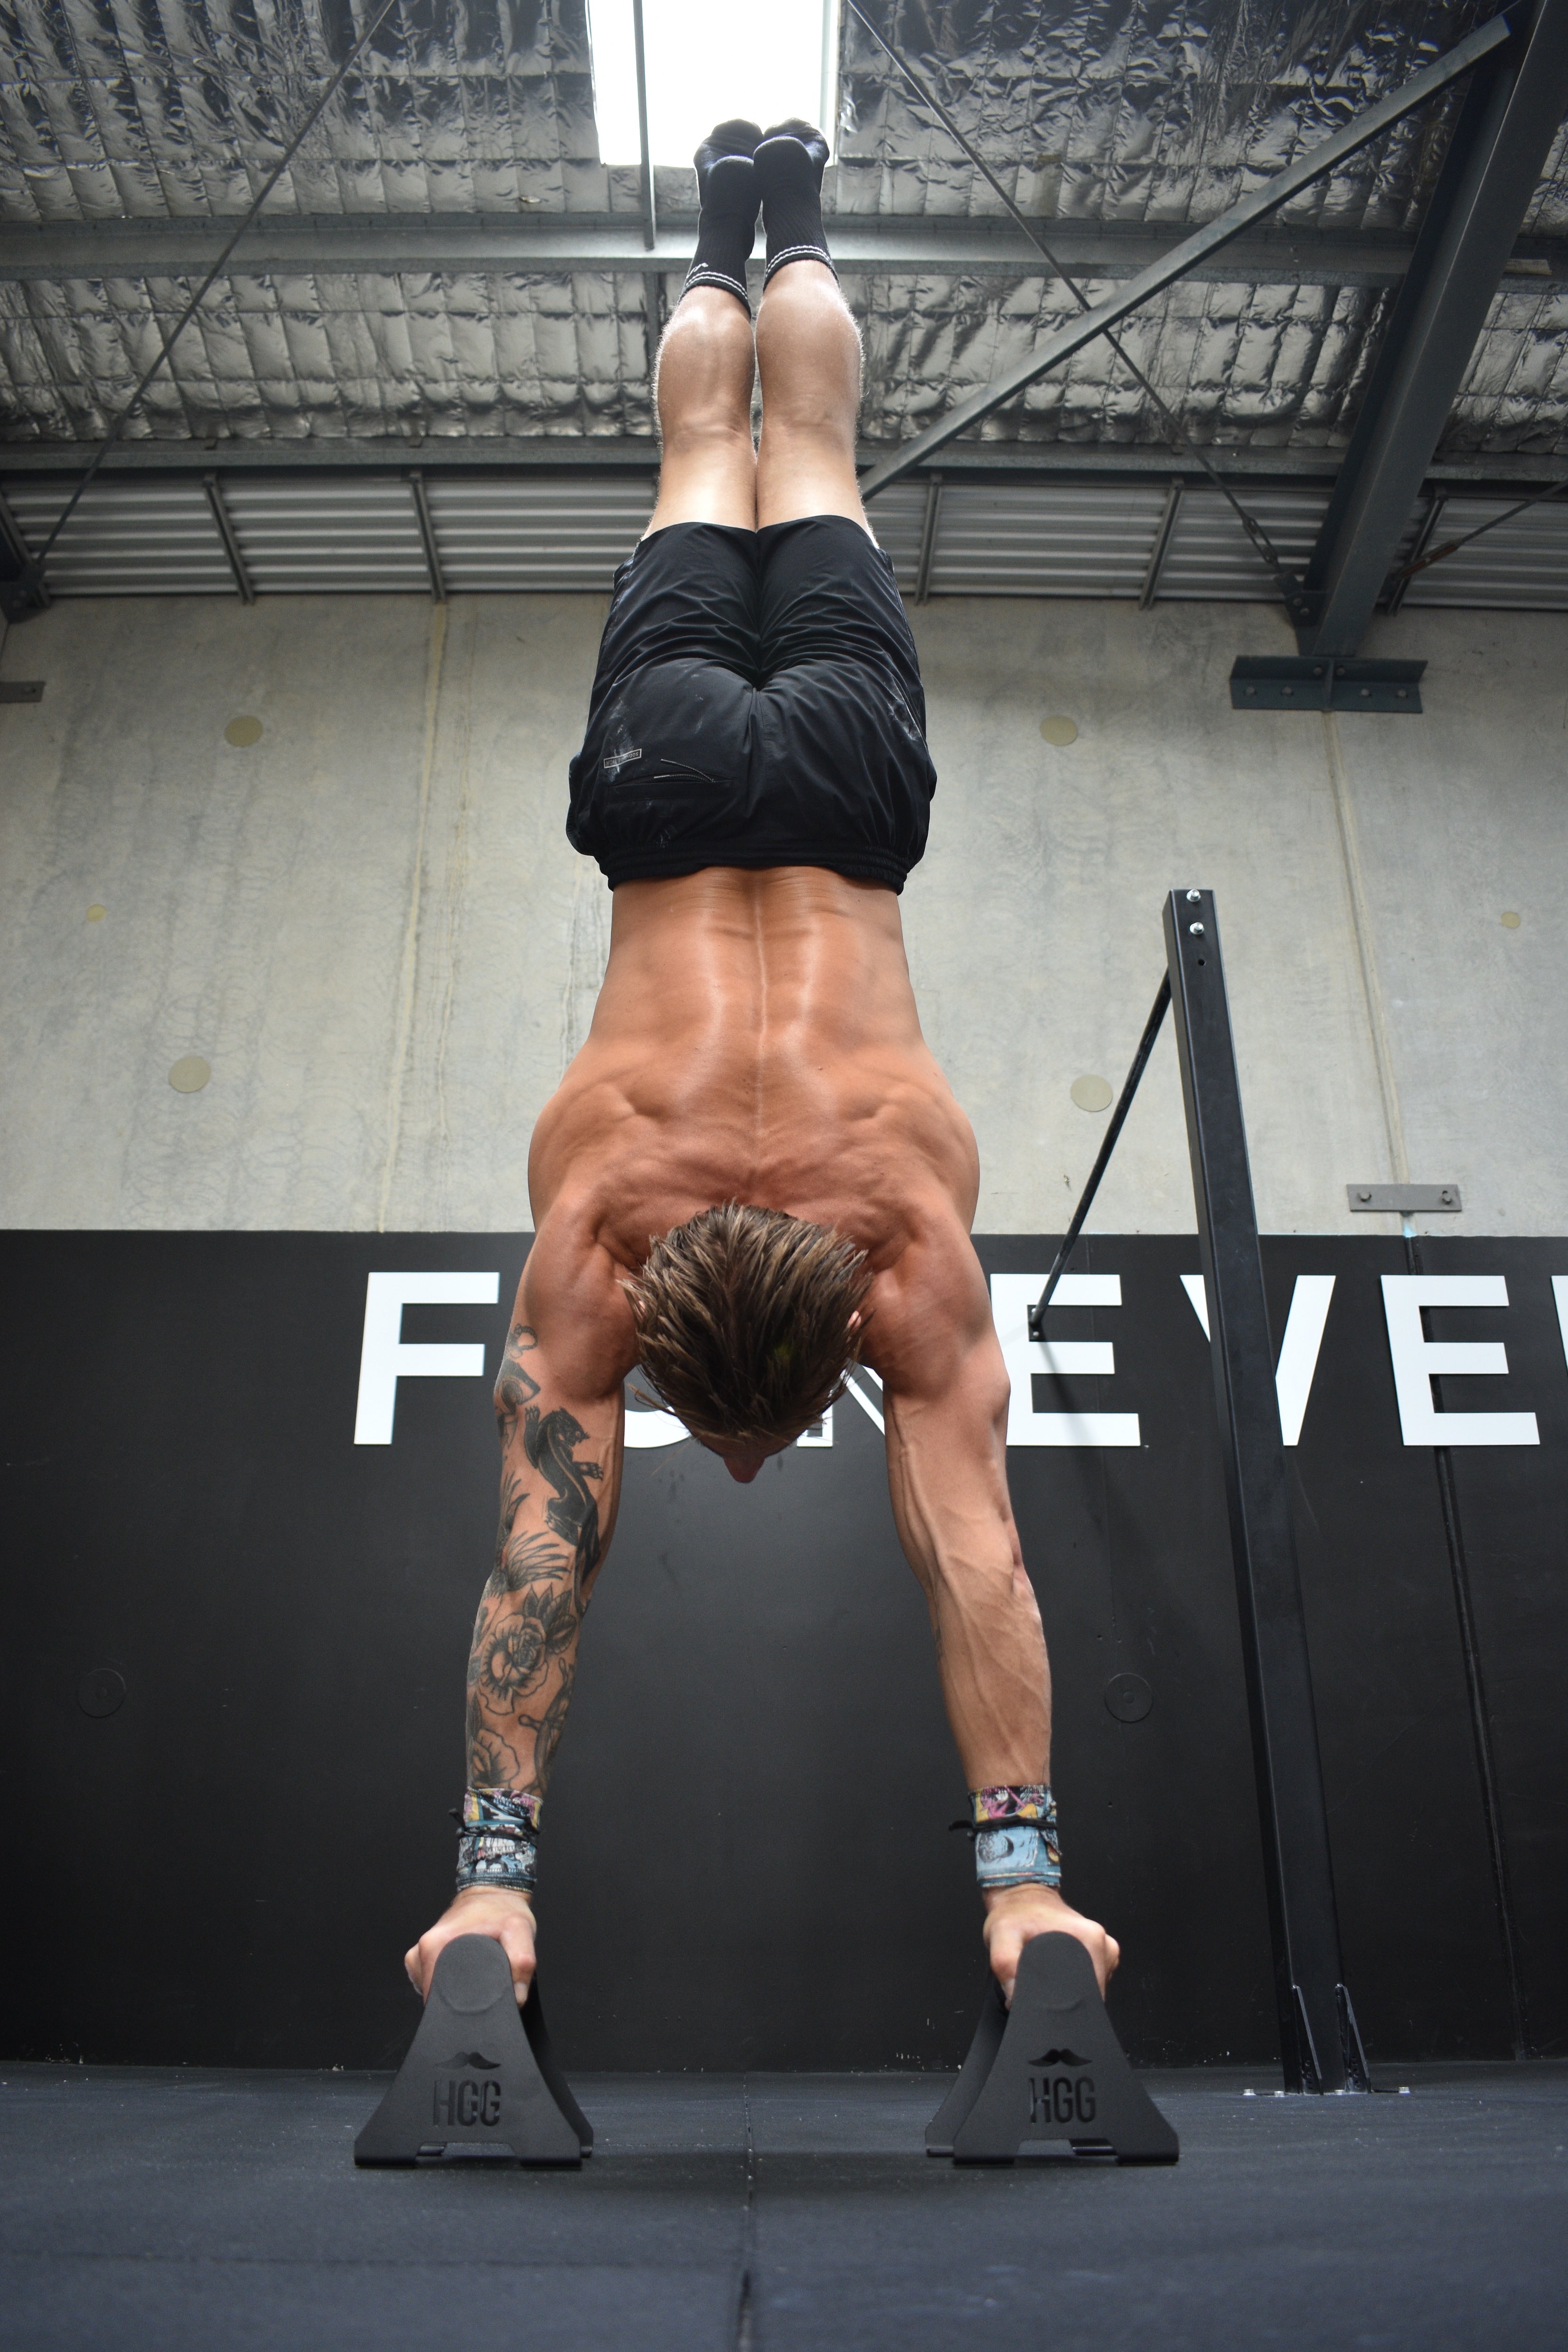 Calisthenics performed with The Mini Parallette Bars